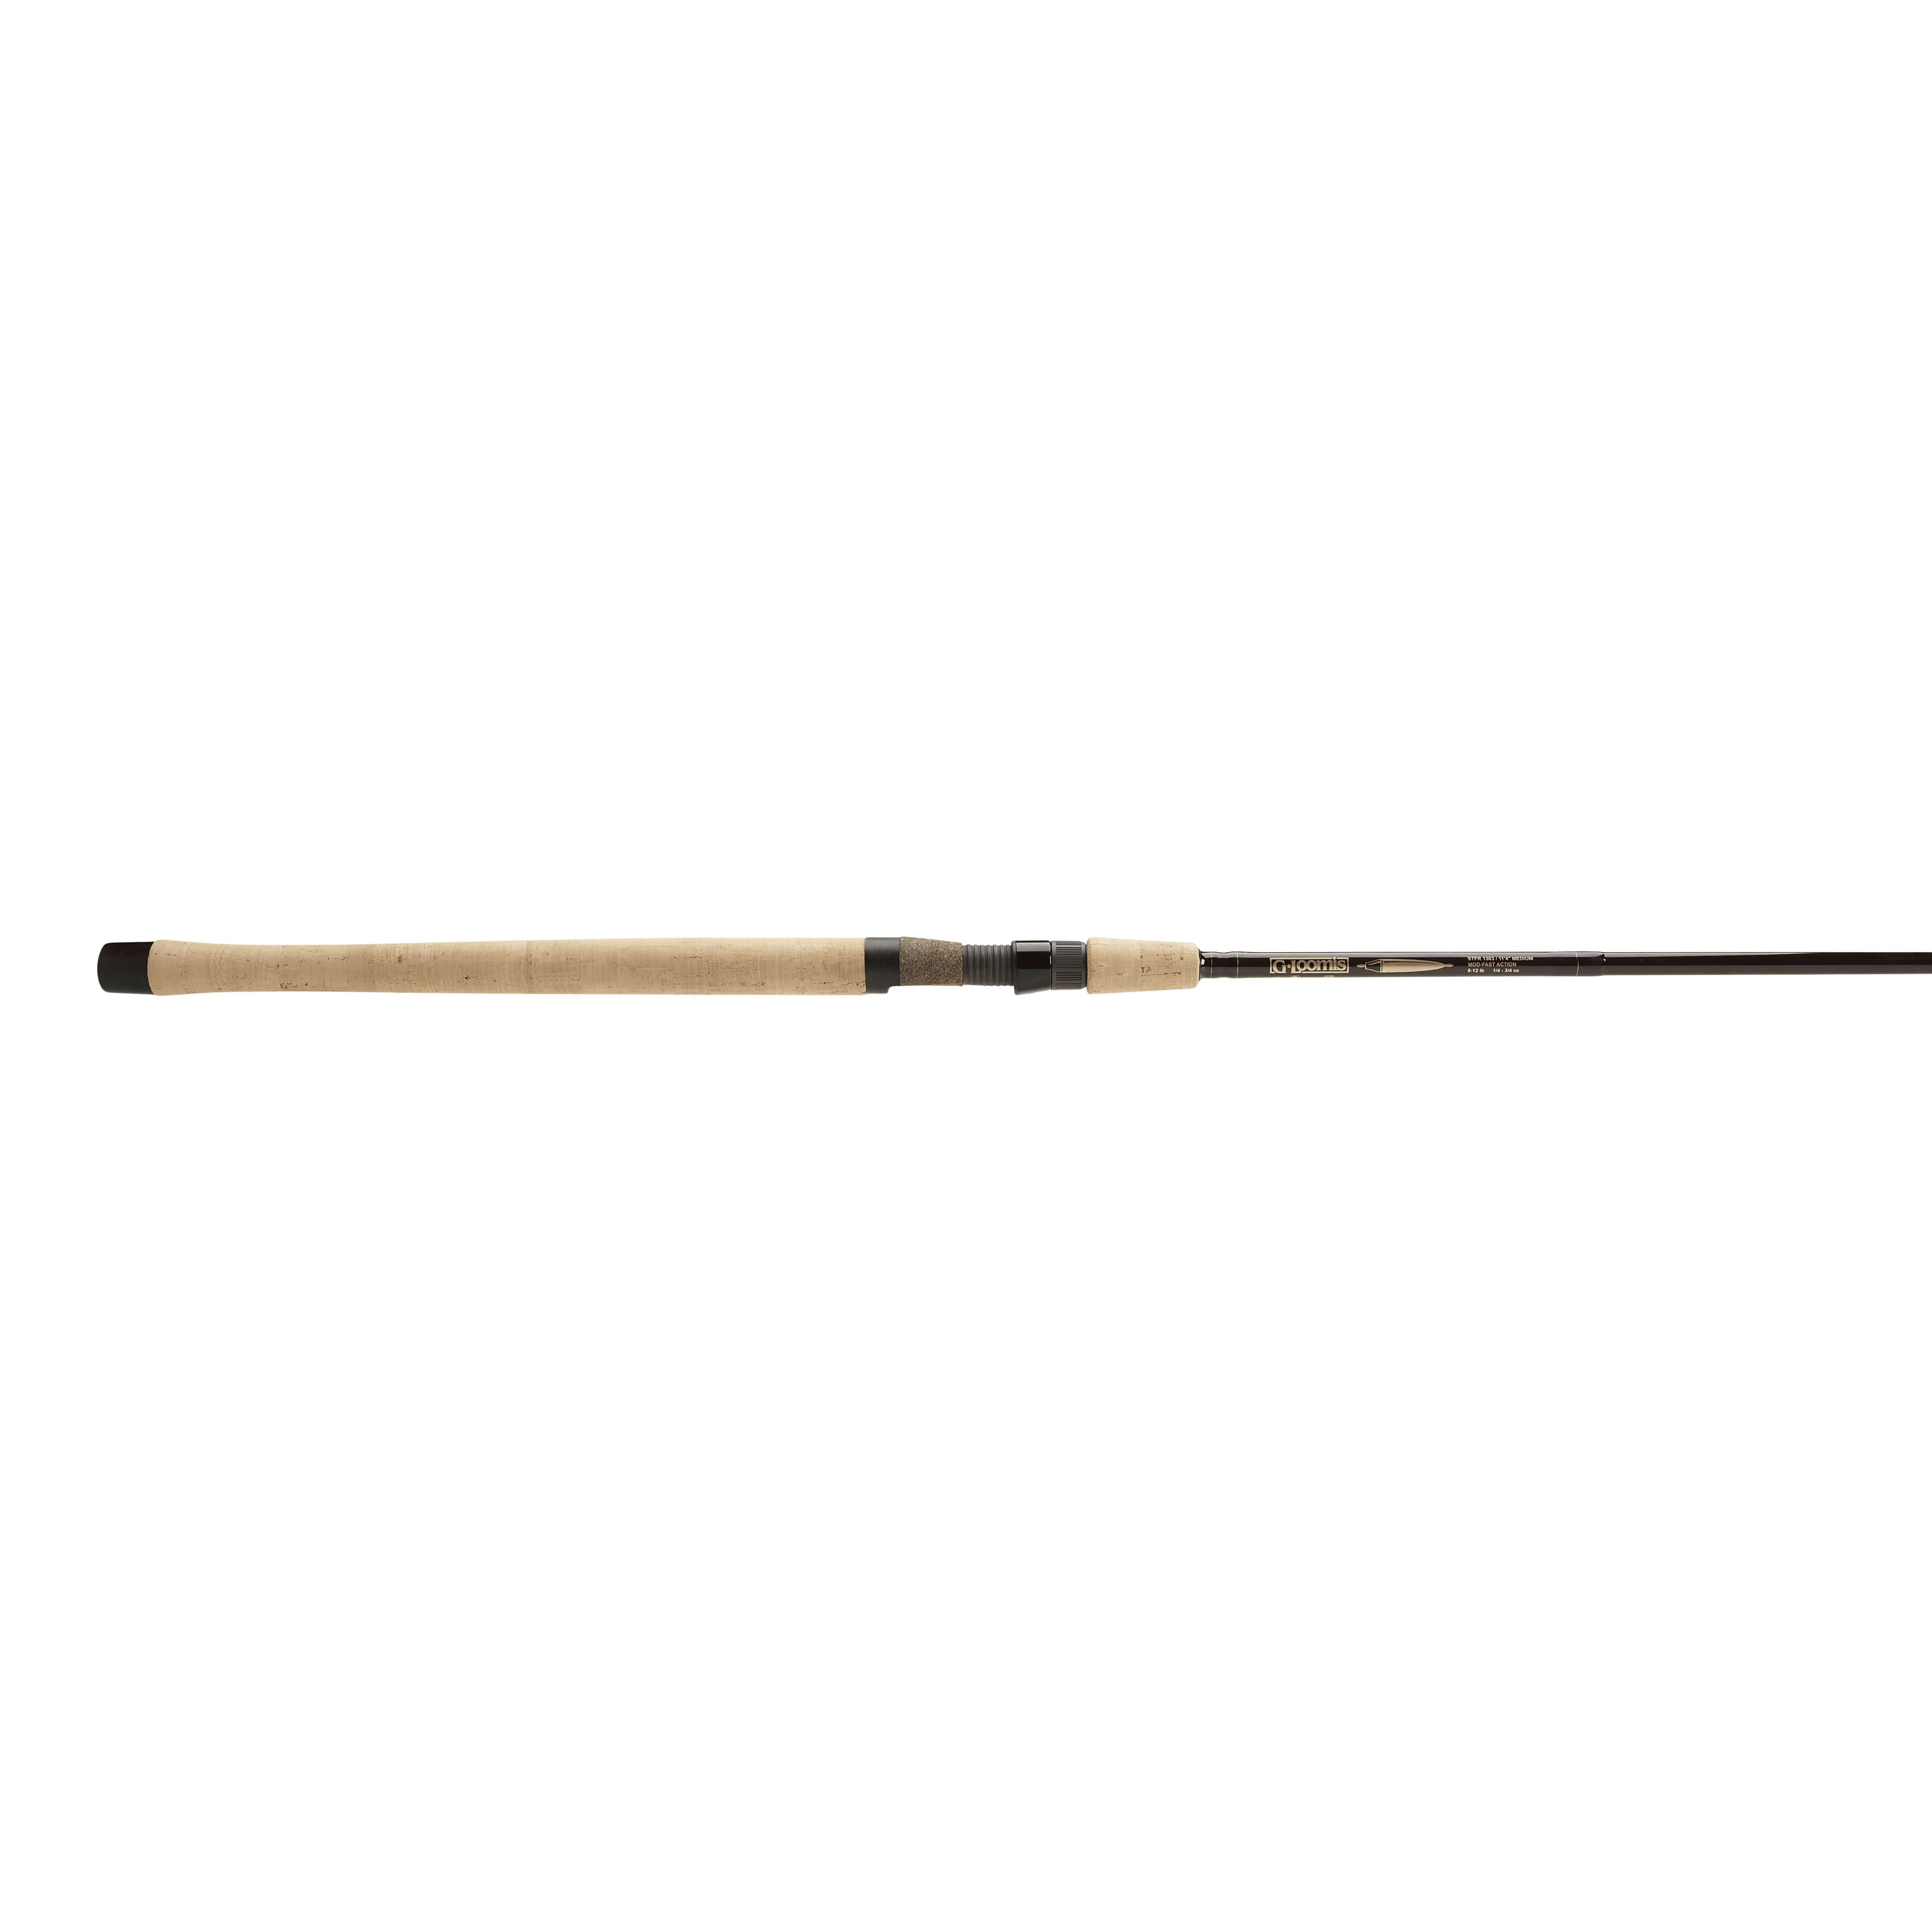 G Loomis Trout & Panfish Spinning Rod SR6010-2 GL3 5'0" Ultra Light 2pc 